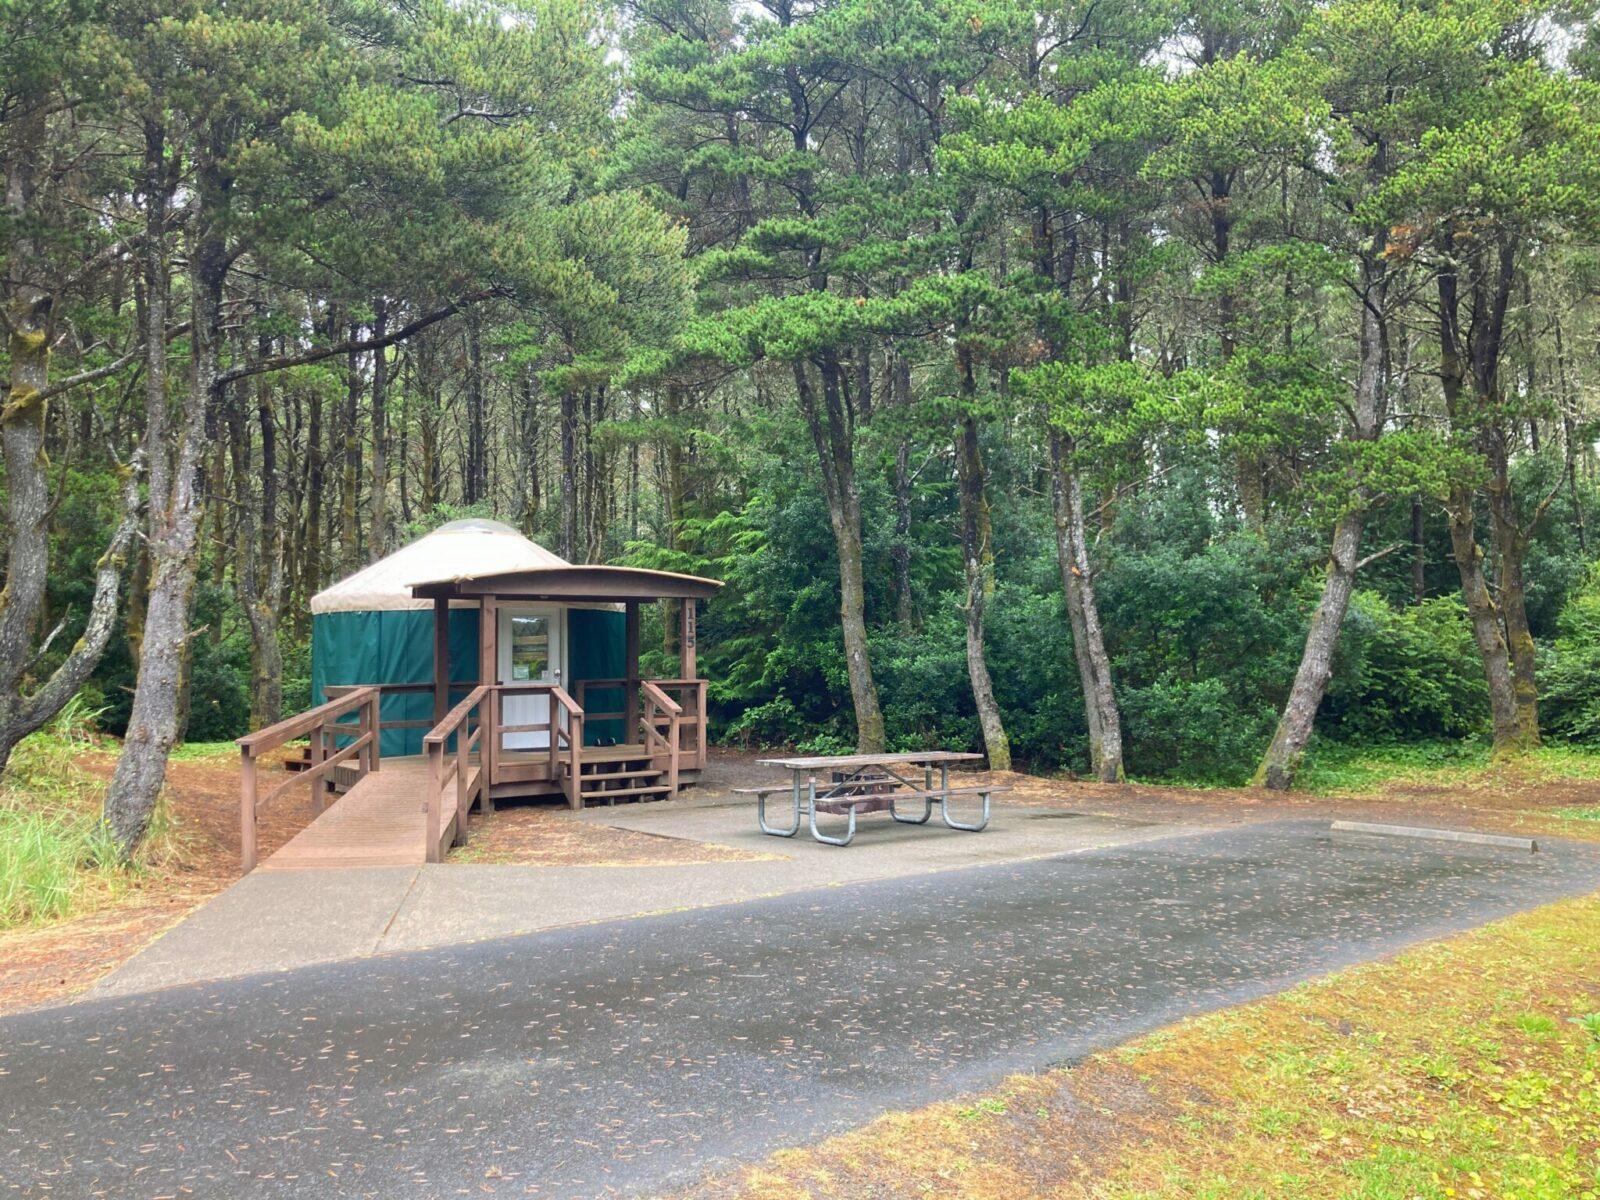 A green yurt with a tan roof surrounded by a wooden porch with stairs and a ramp. There is also a picnic table, firepit and paved parking spot. The yurt is surrounded by forest.